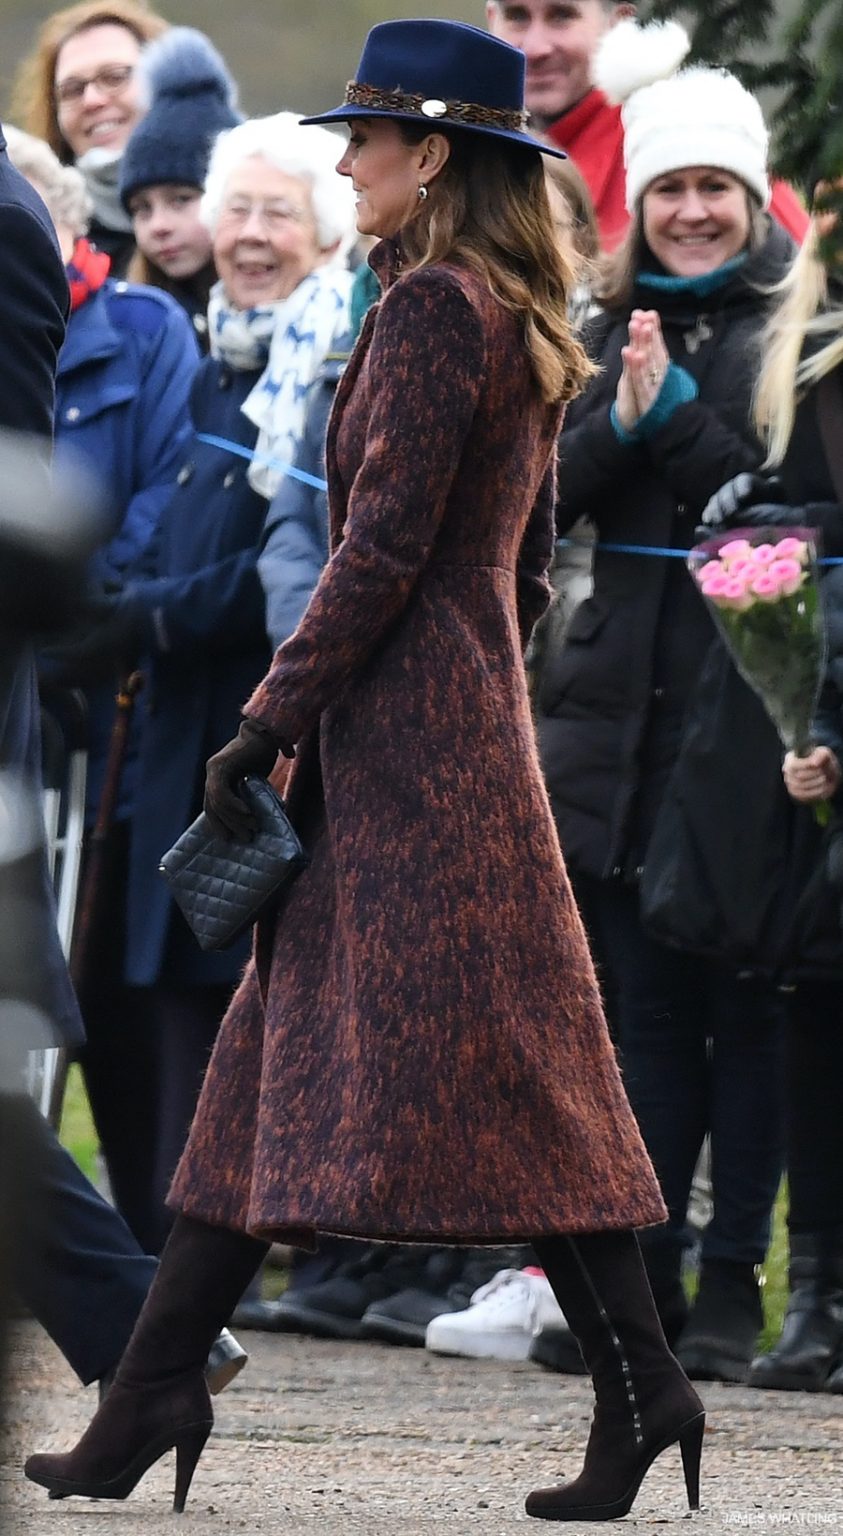 Kate Middleton's Cornelia James Imogen Gloves with Bow in Chocolate Brown